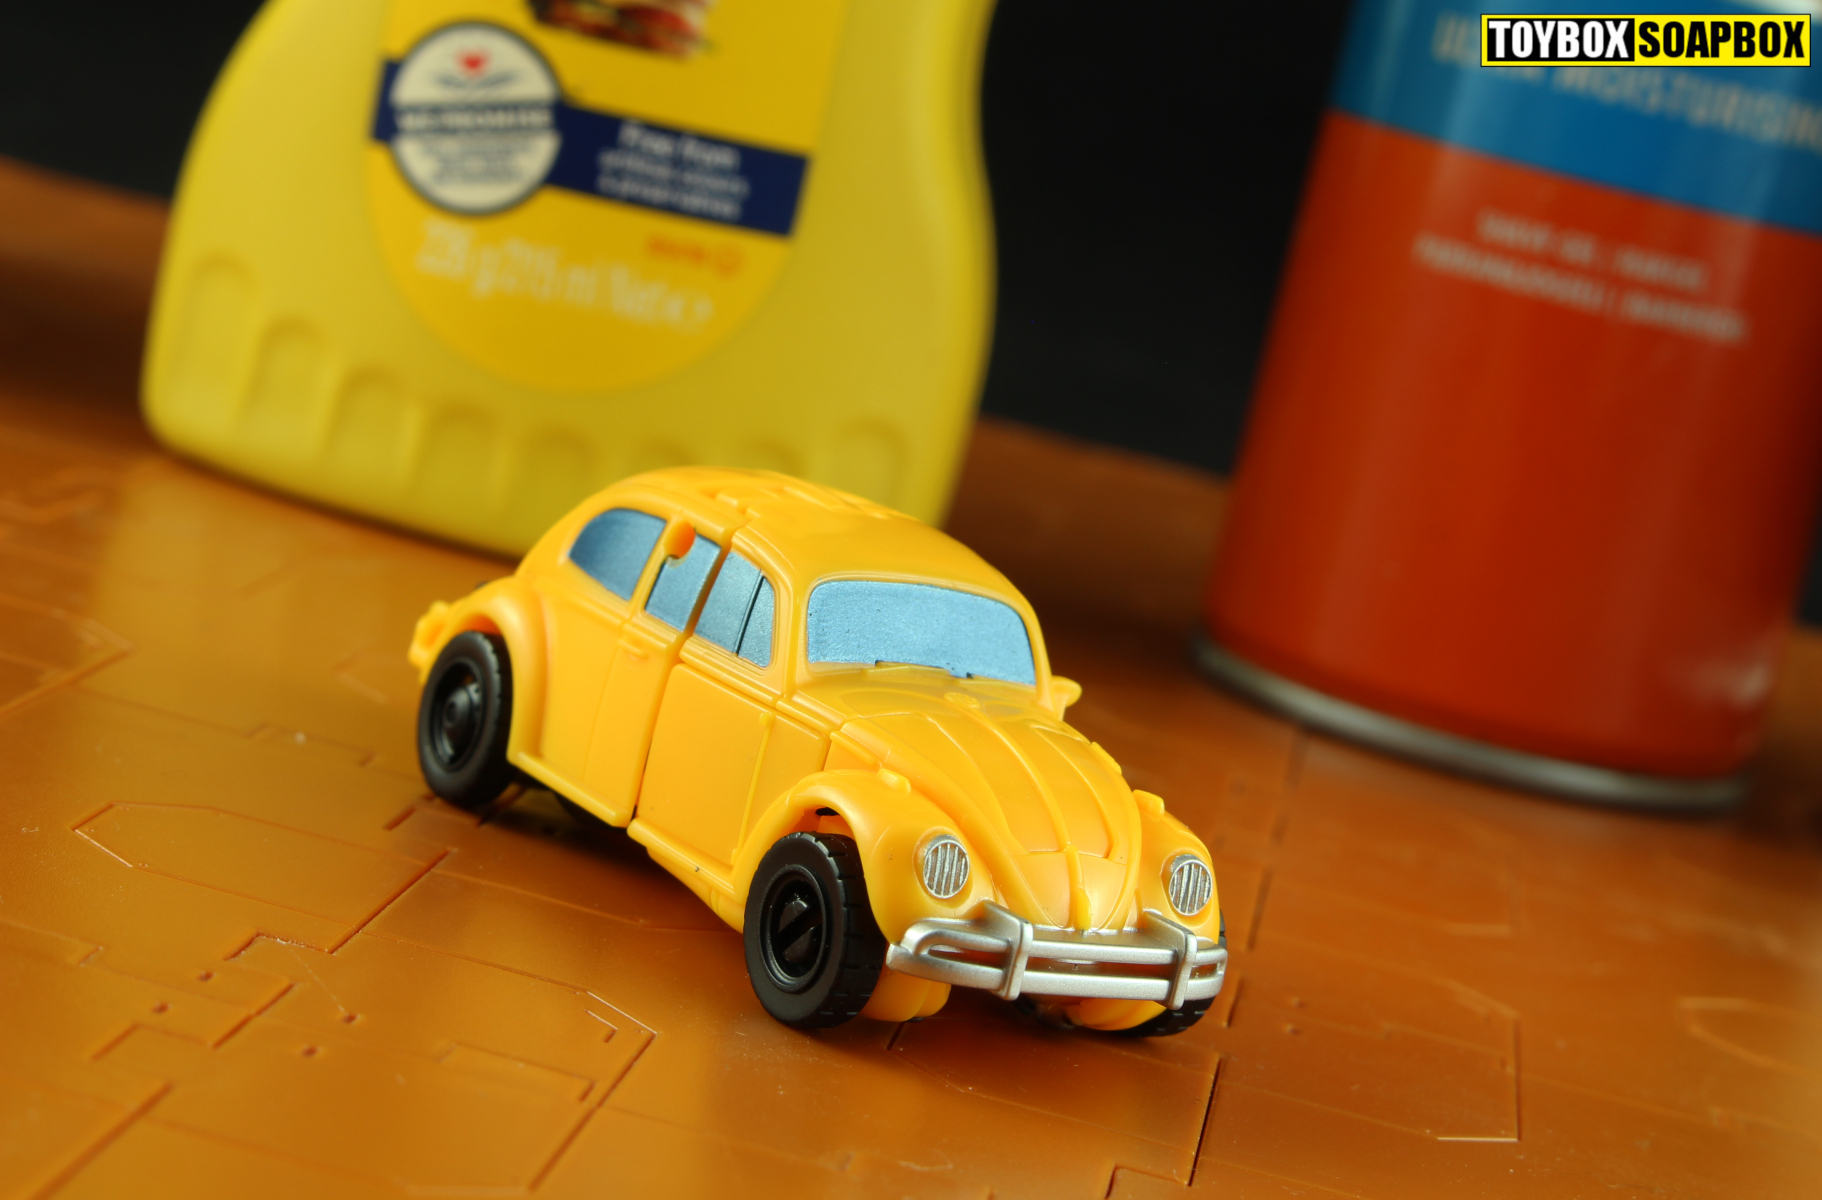 NEW Free Shipping Details about   Transformers Bumblebee Energon Igniters VW Beetle 